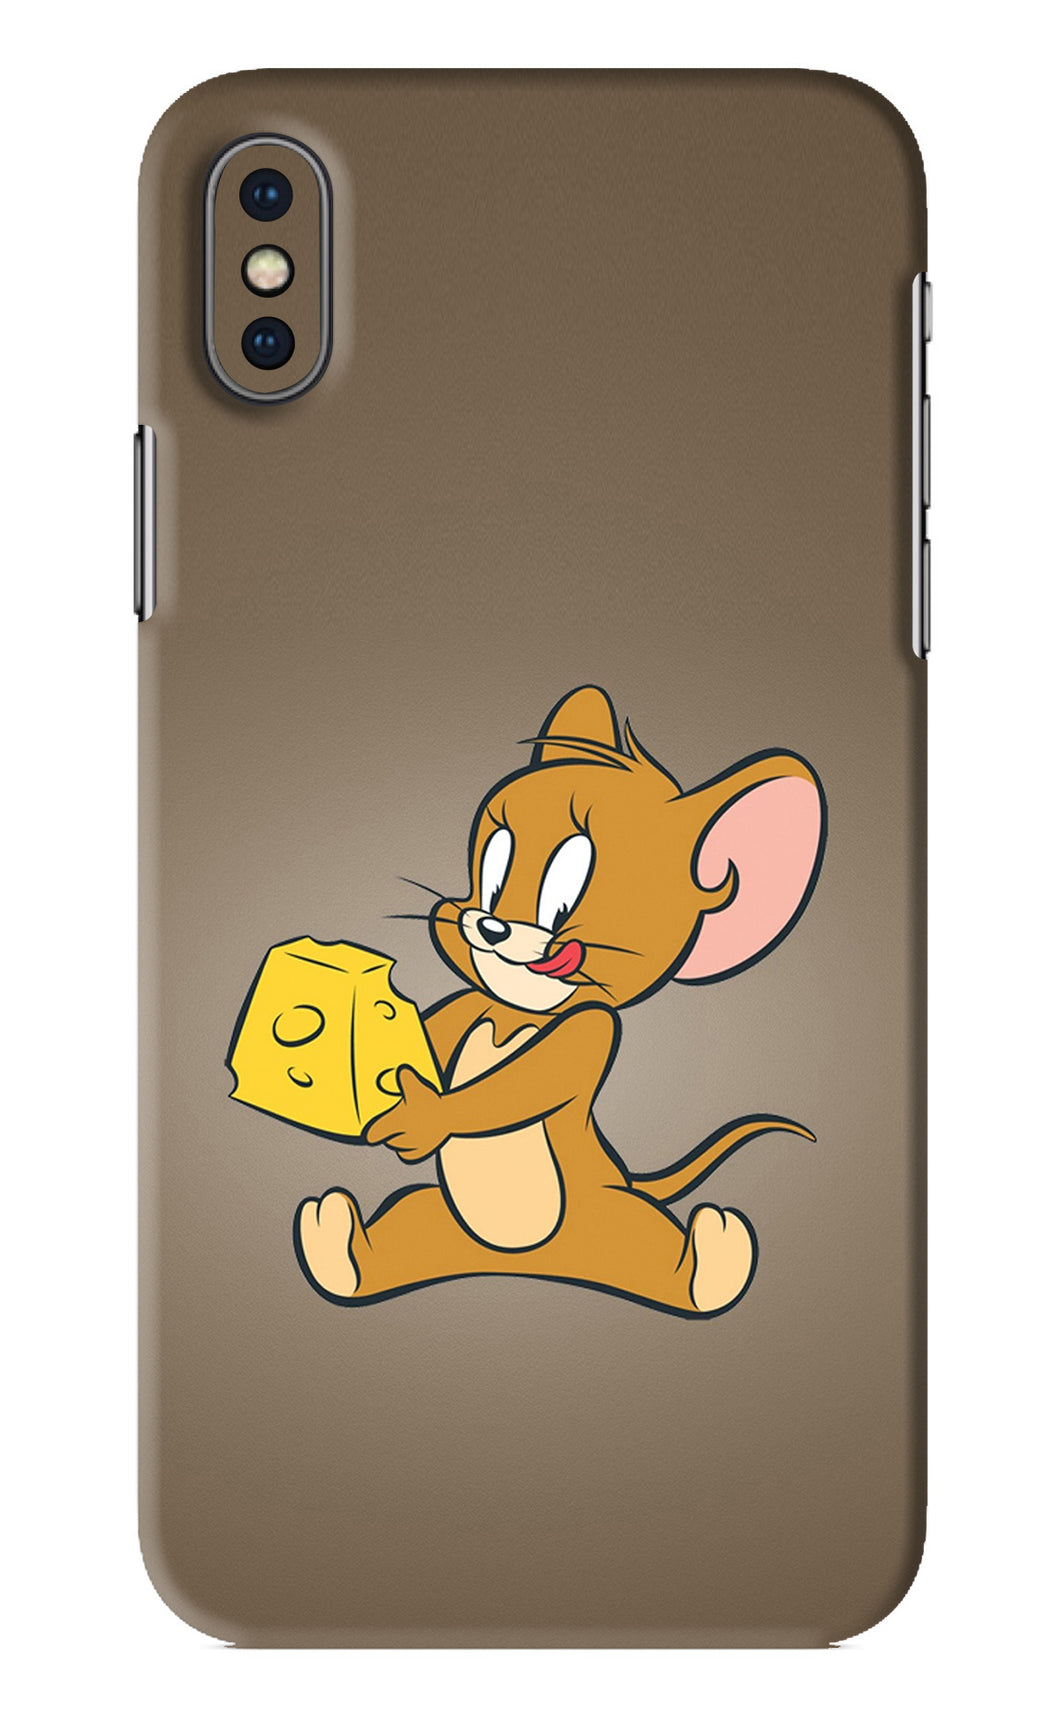 Jerry iPhone XS Back Skin Wrap